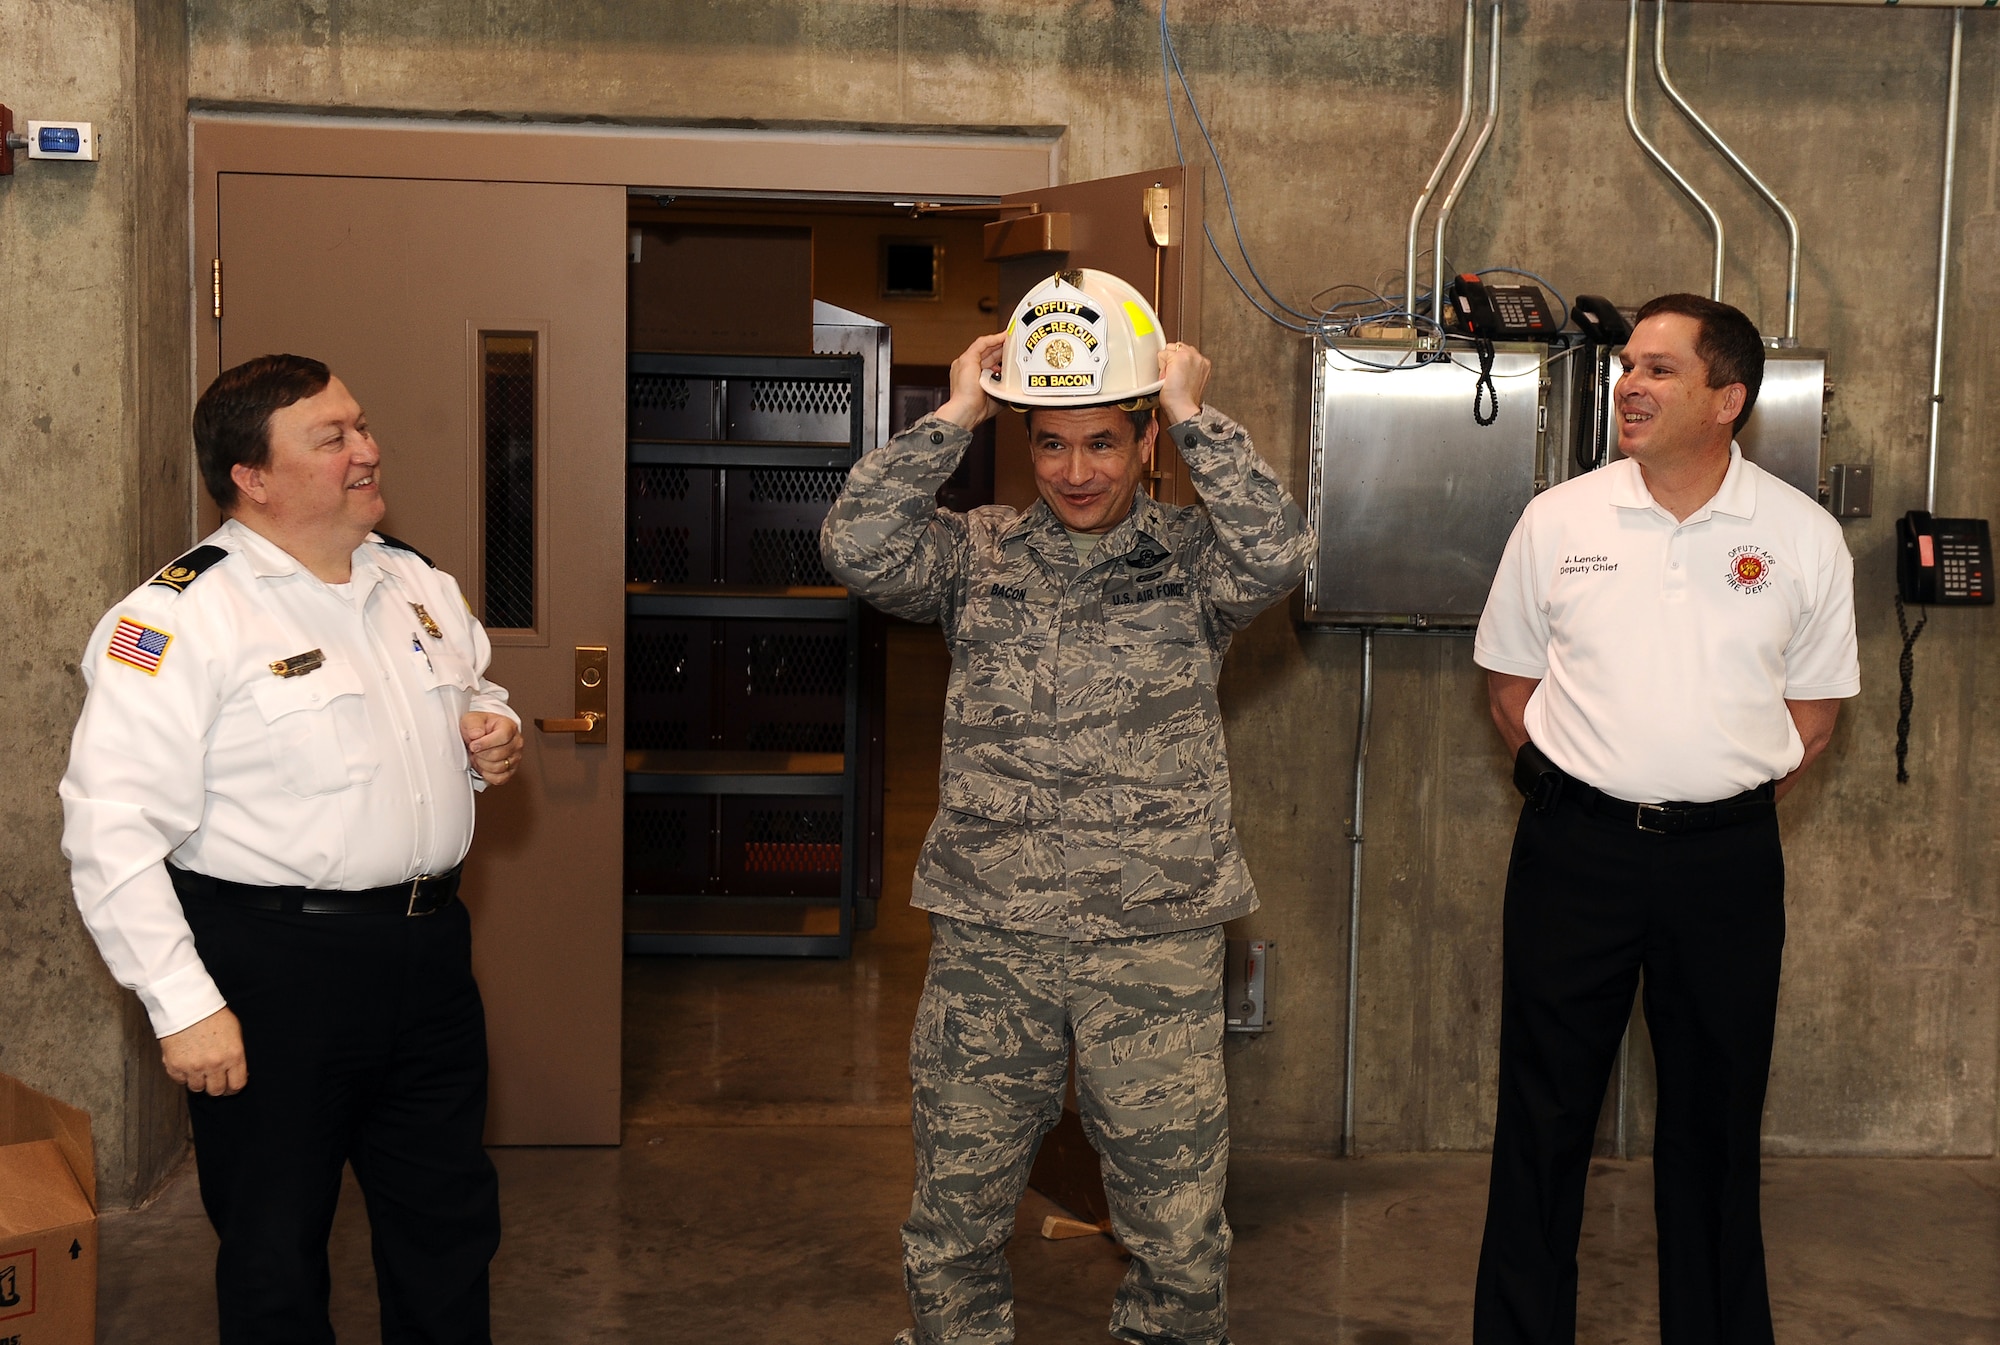 U.S. Air Force Brig Gen. Donald Bacon, 55th Wing commander, places his honorary fireman's hat on his head during morning roll call at the Offutt Air Force Base firehouse, Neb., March 8.  Offutt Fire Chief David Eblin (left) and deputy fire chief James Lencke (right) honored Bacon with a gift following his 24-hour shift training with Offutt's fire fighters.  (U.S. Air Force photo by Josh Plueger/Released).